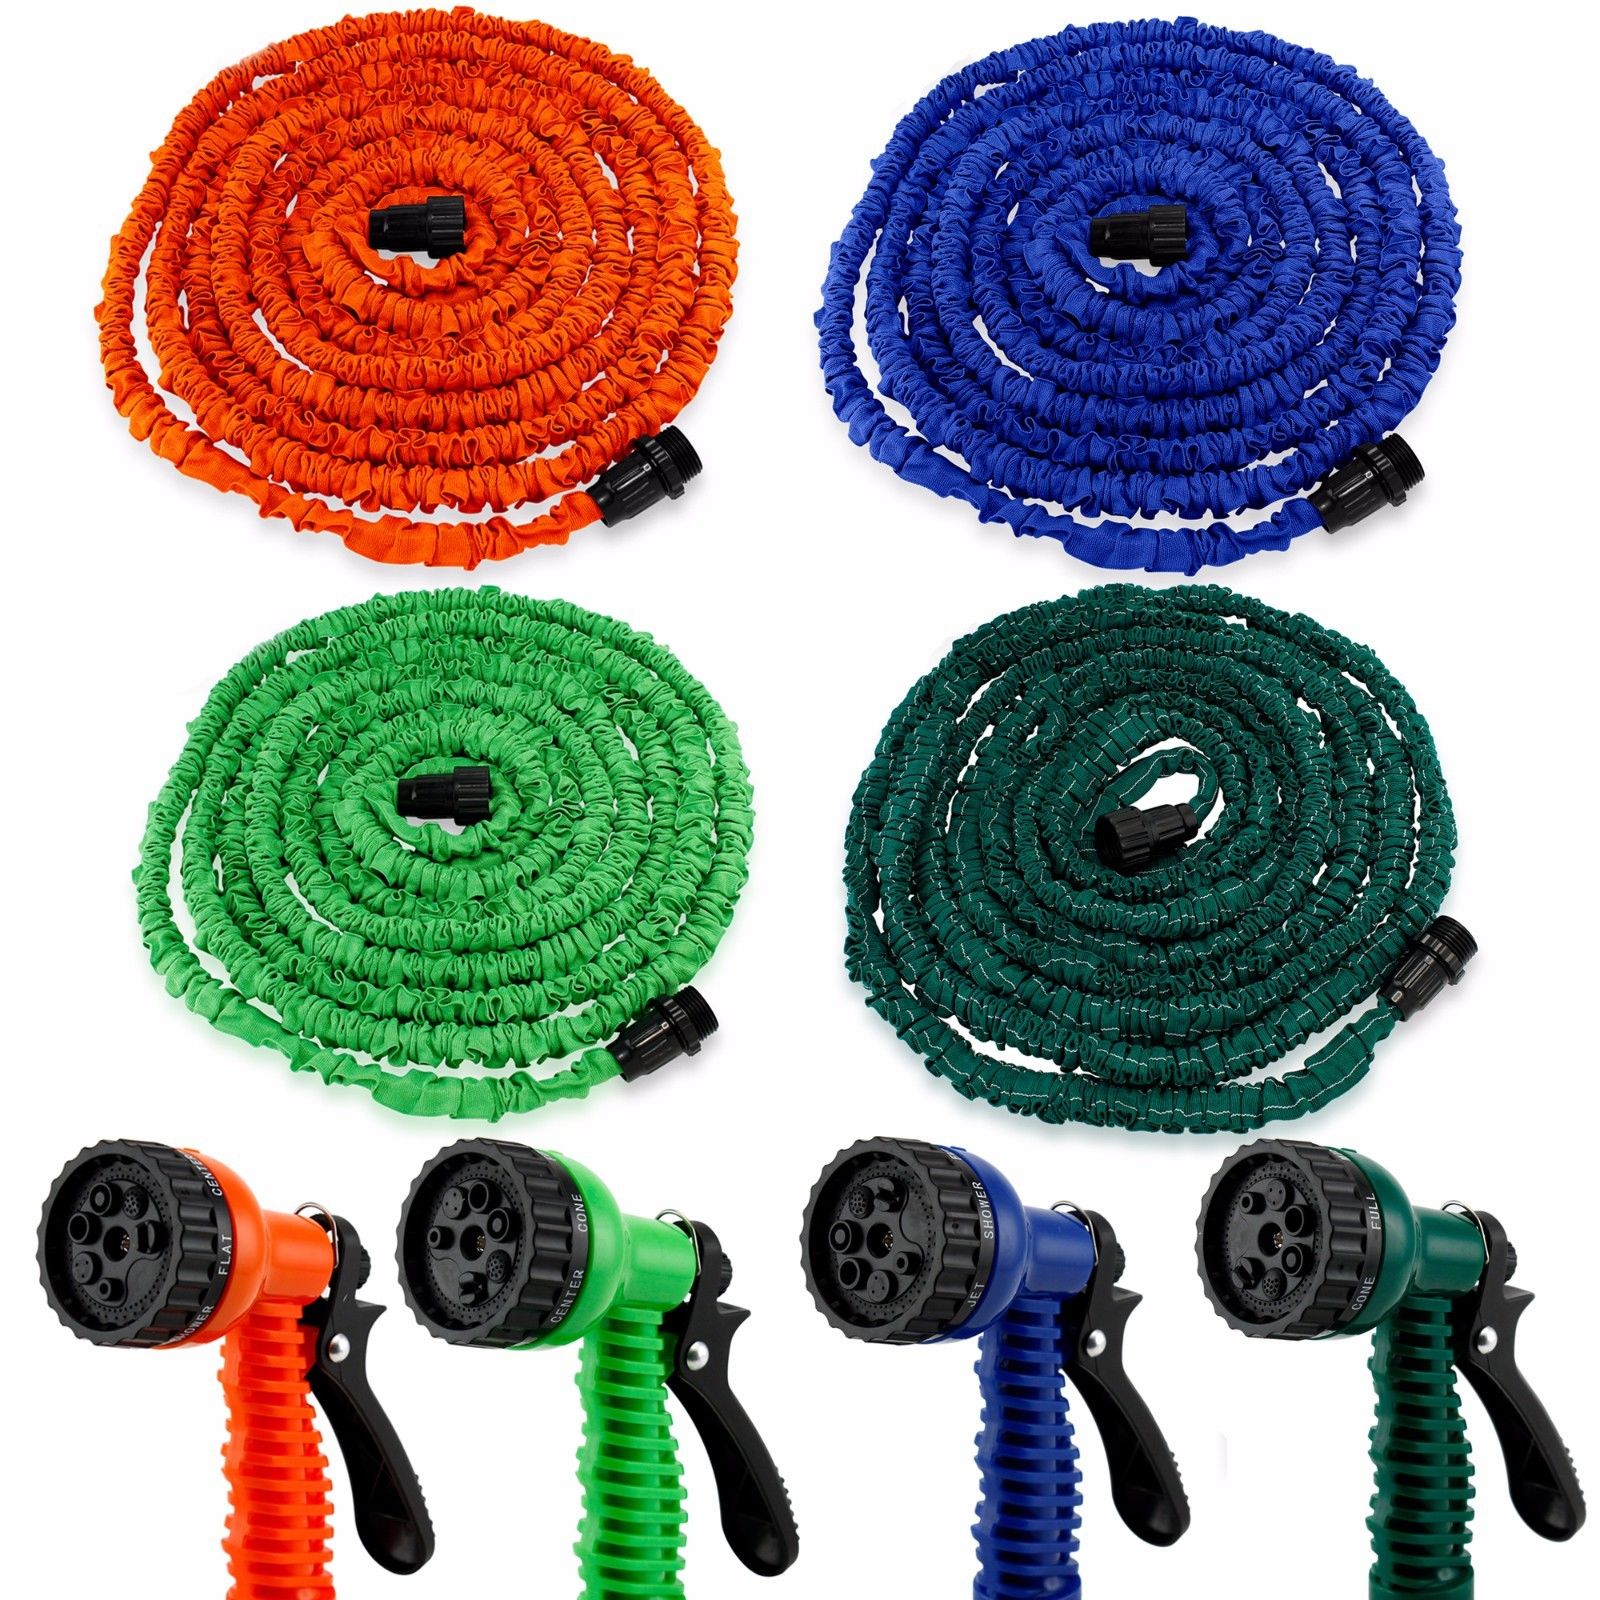 Expandable flexible garden water hose with spray nozzle from $5